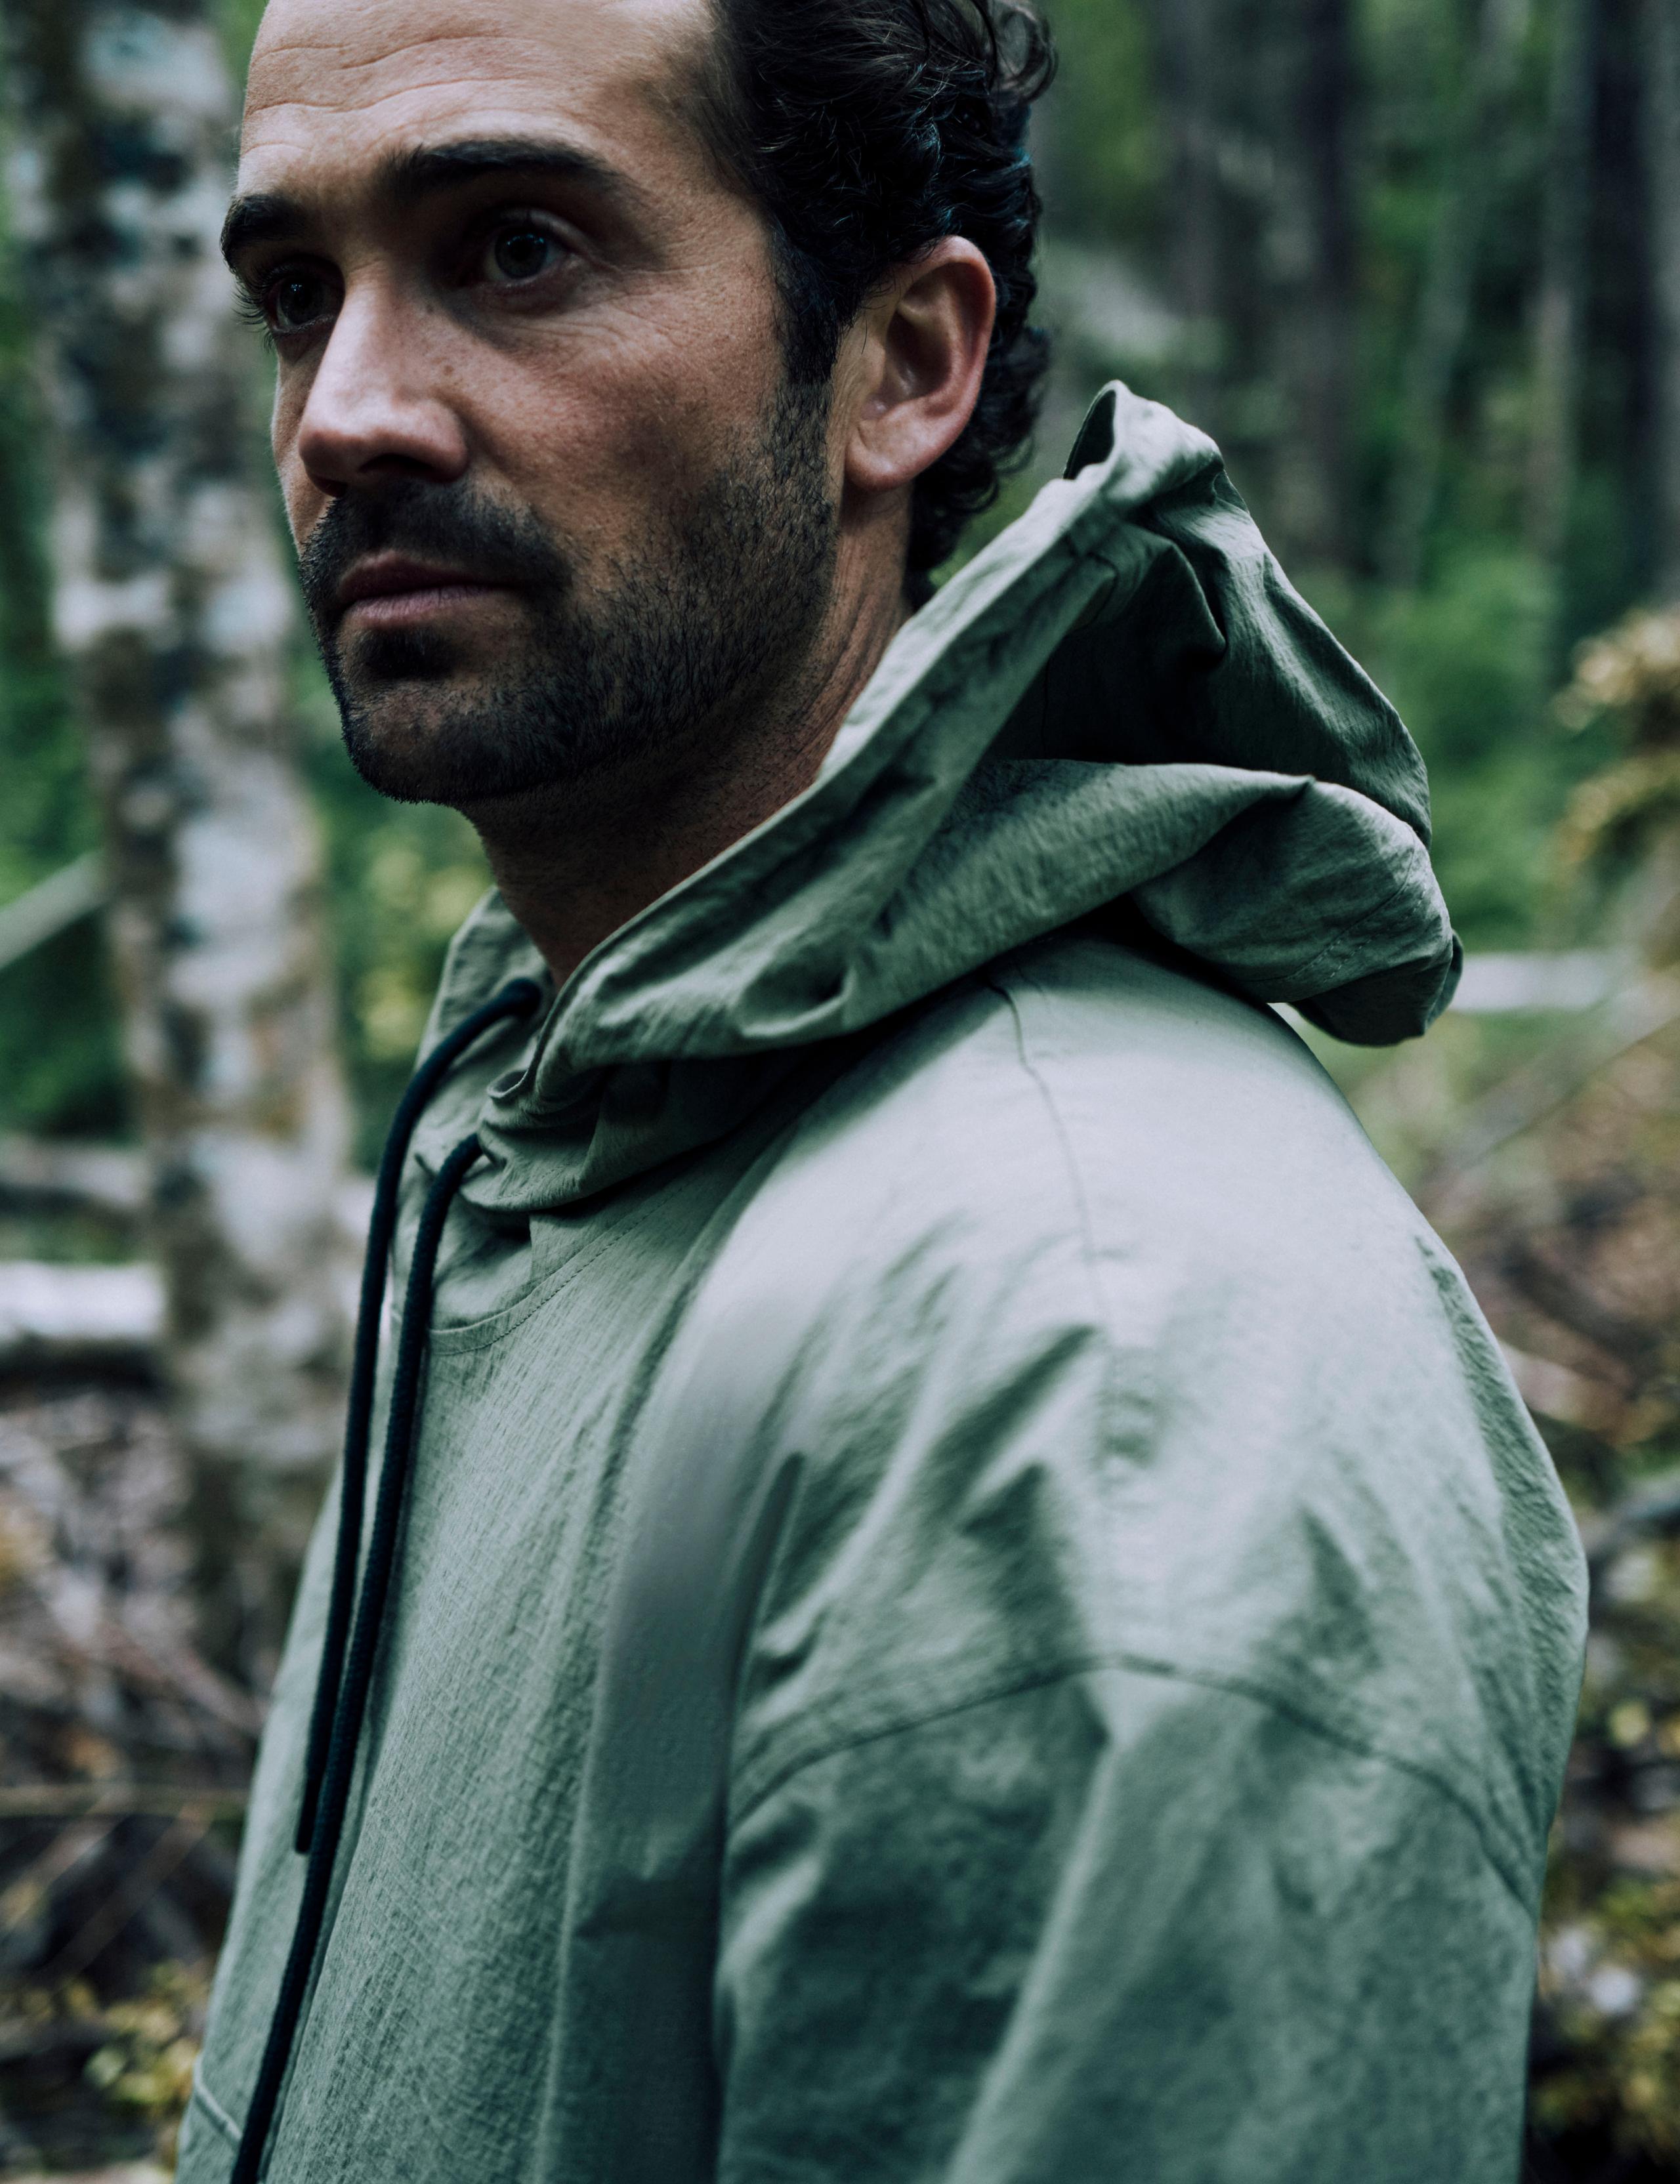 Closeup of man in forest wearing the Harrier Anorak